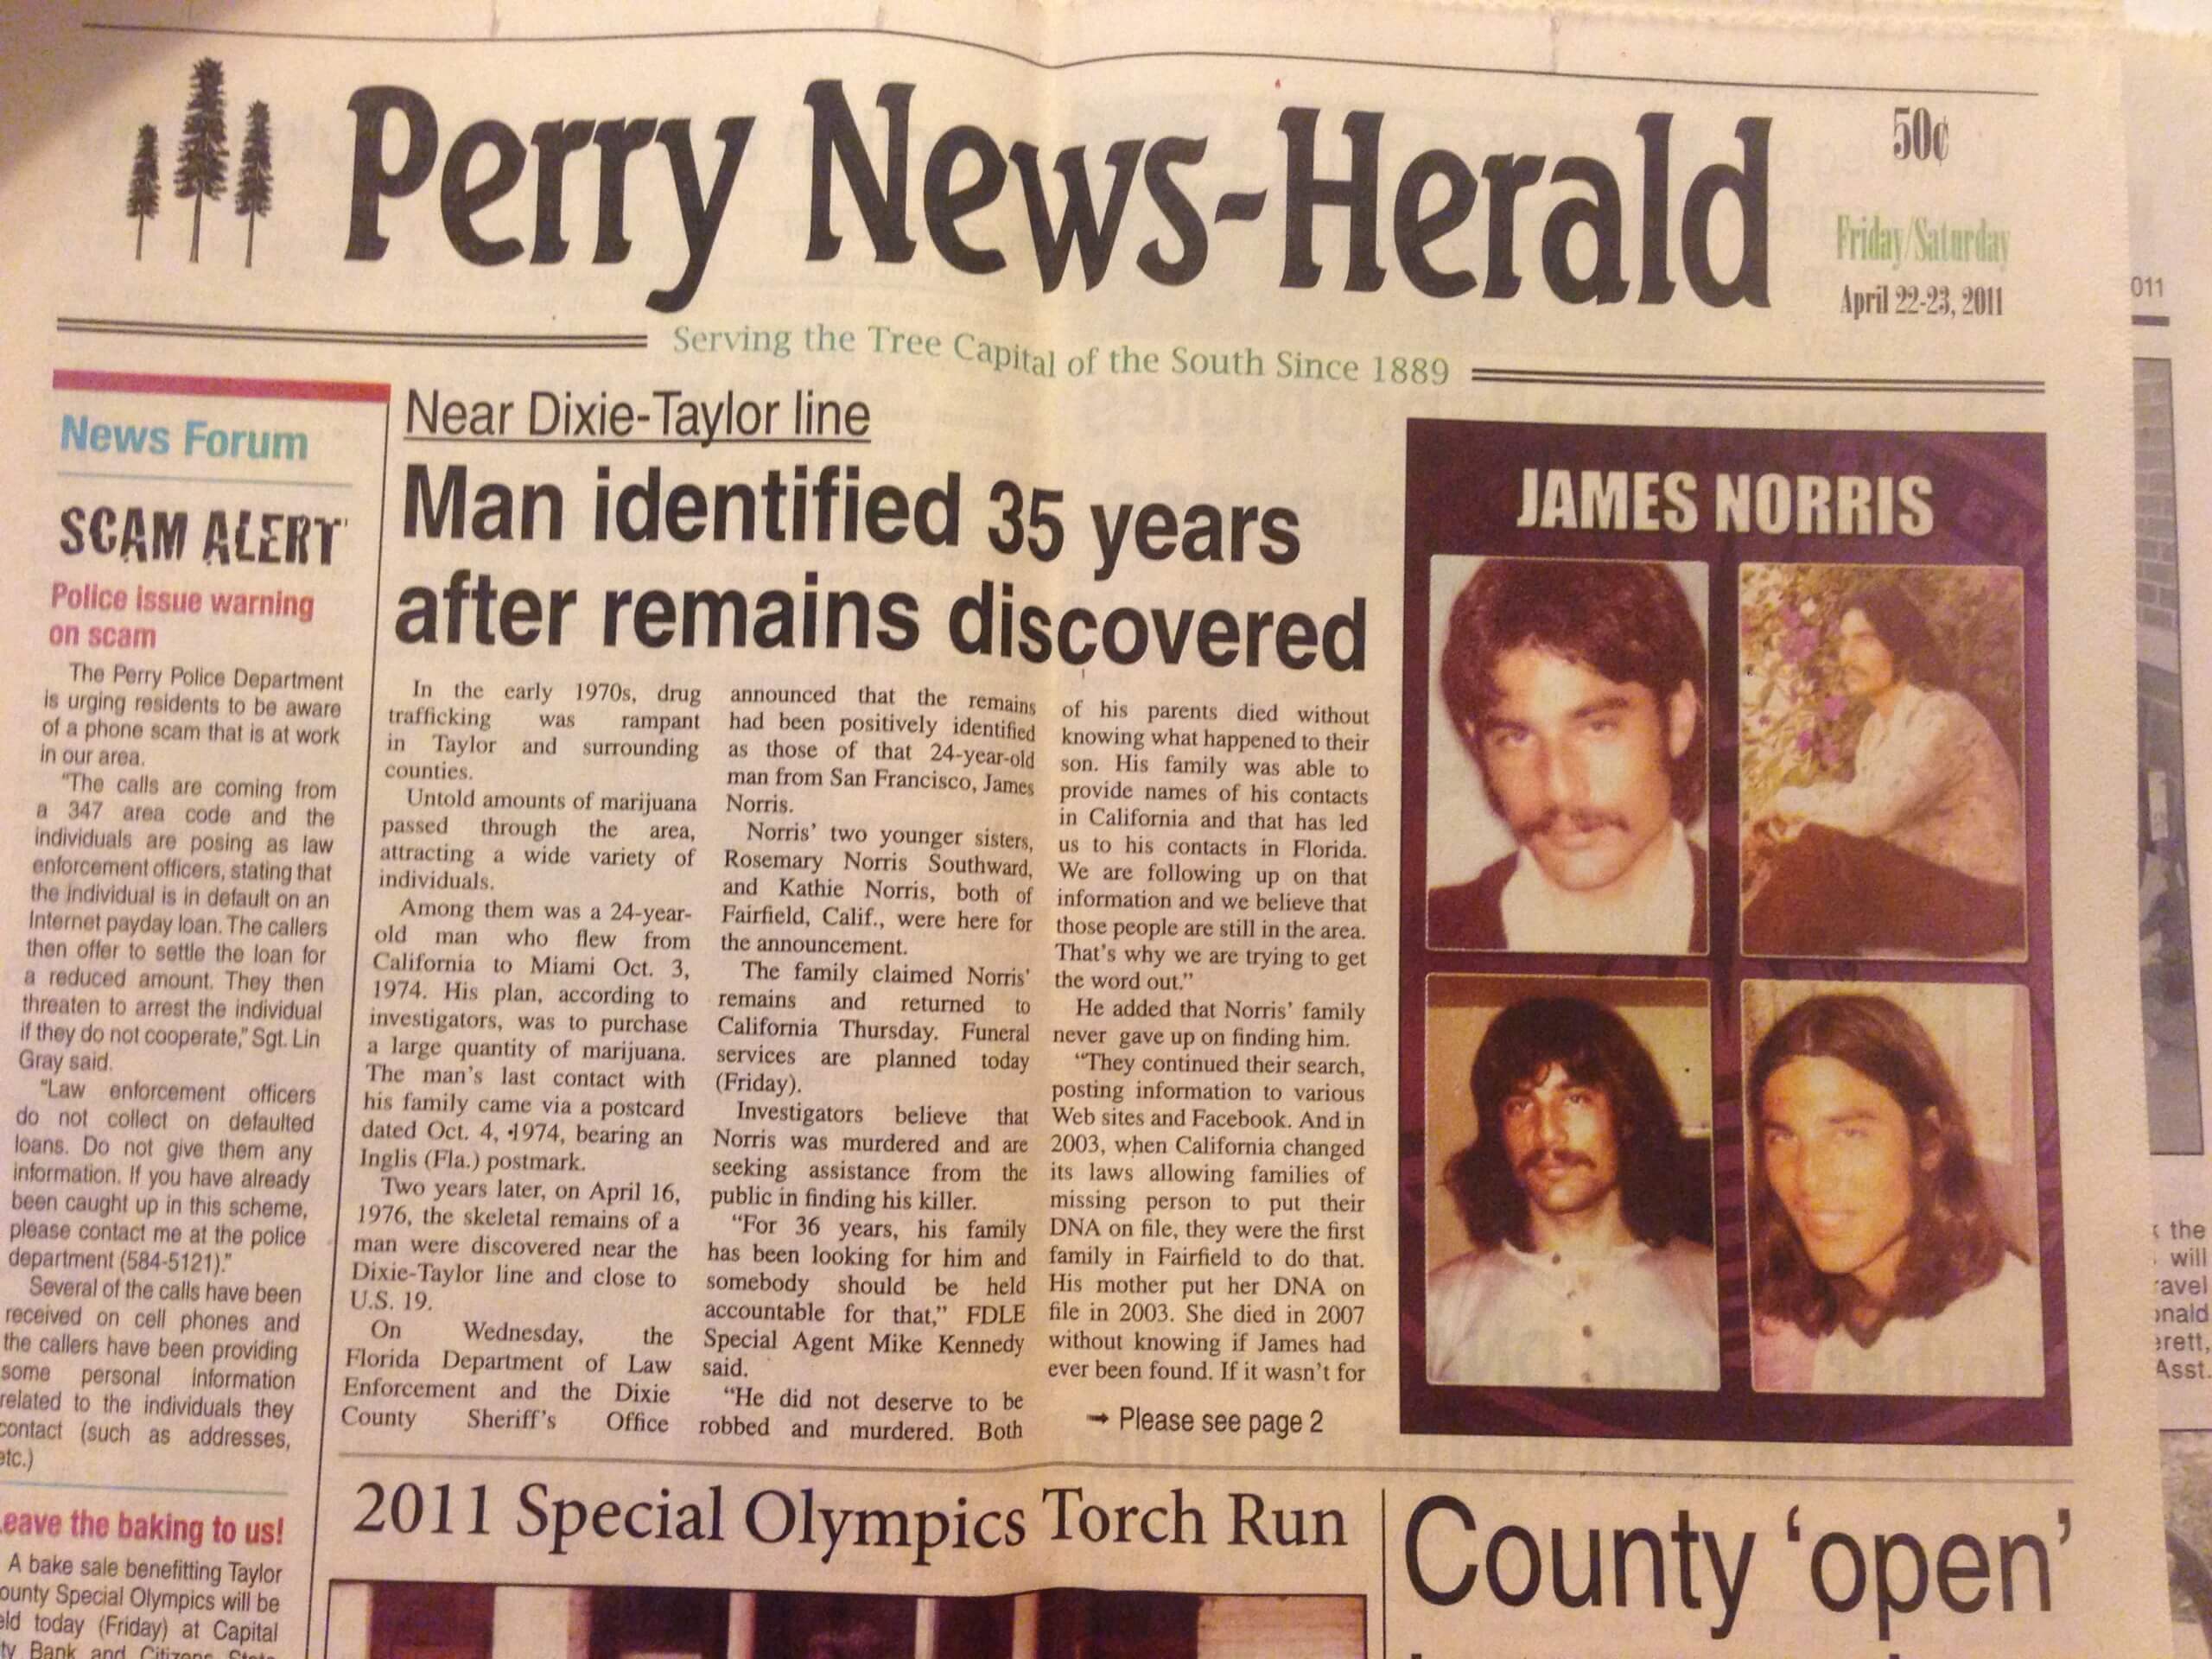 james norris unsolved murder cold case florida dixie county california